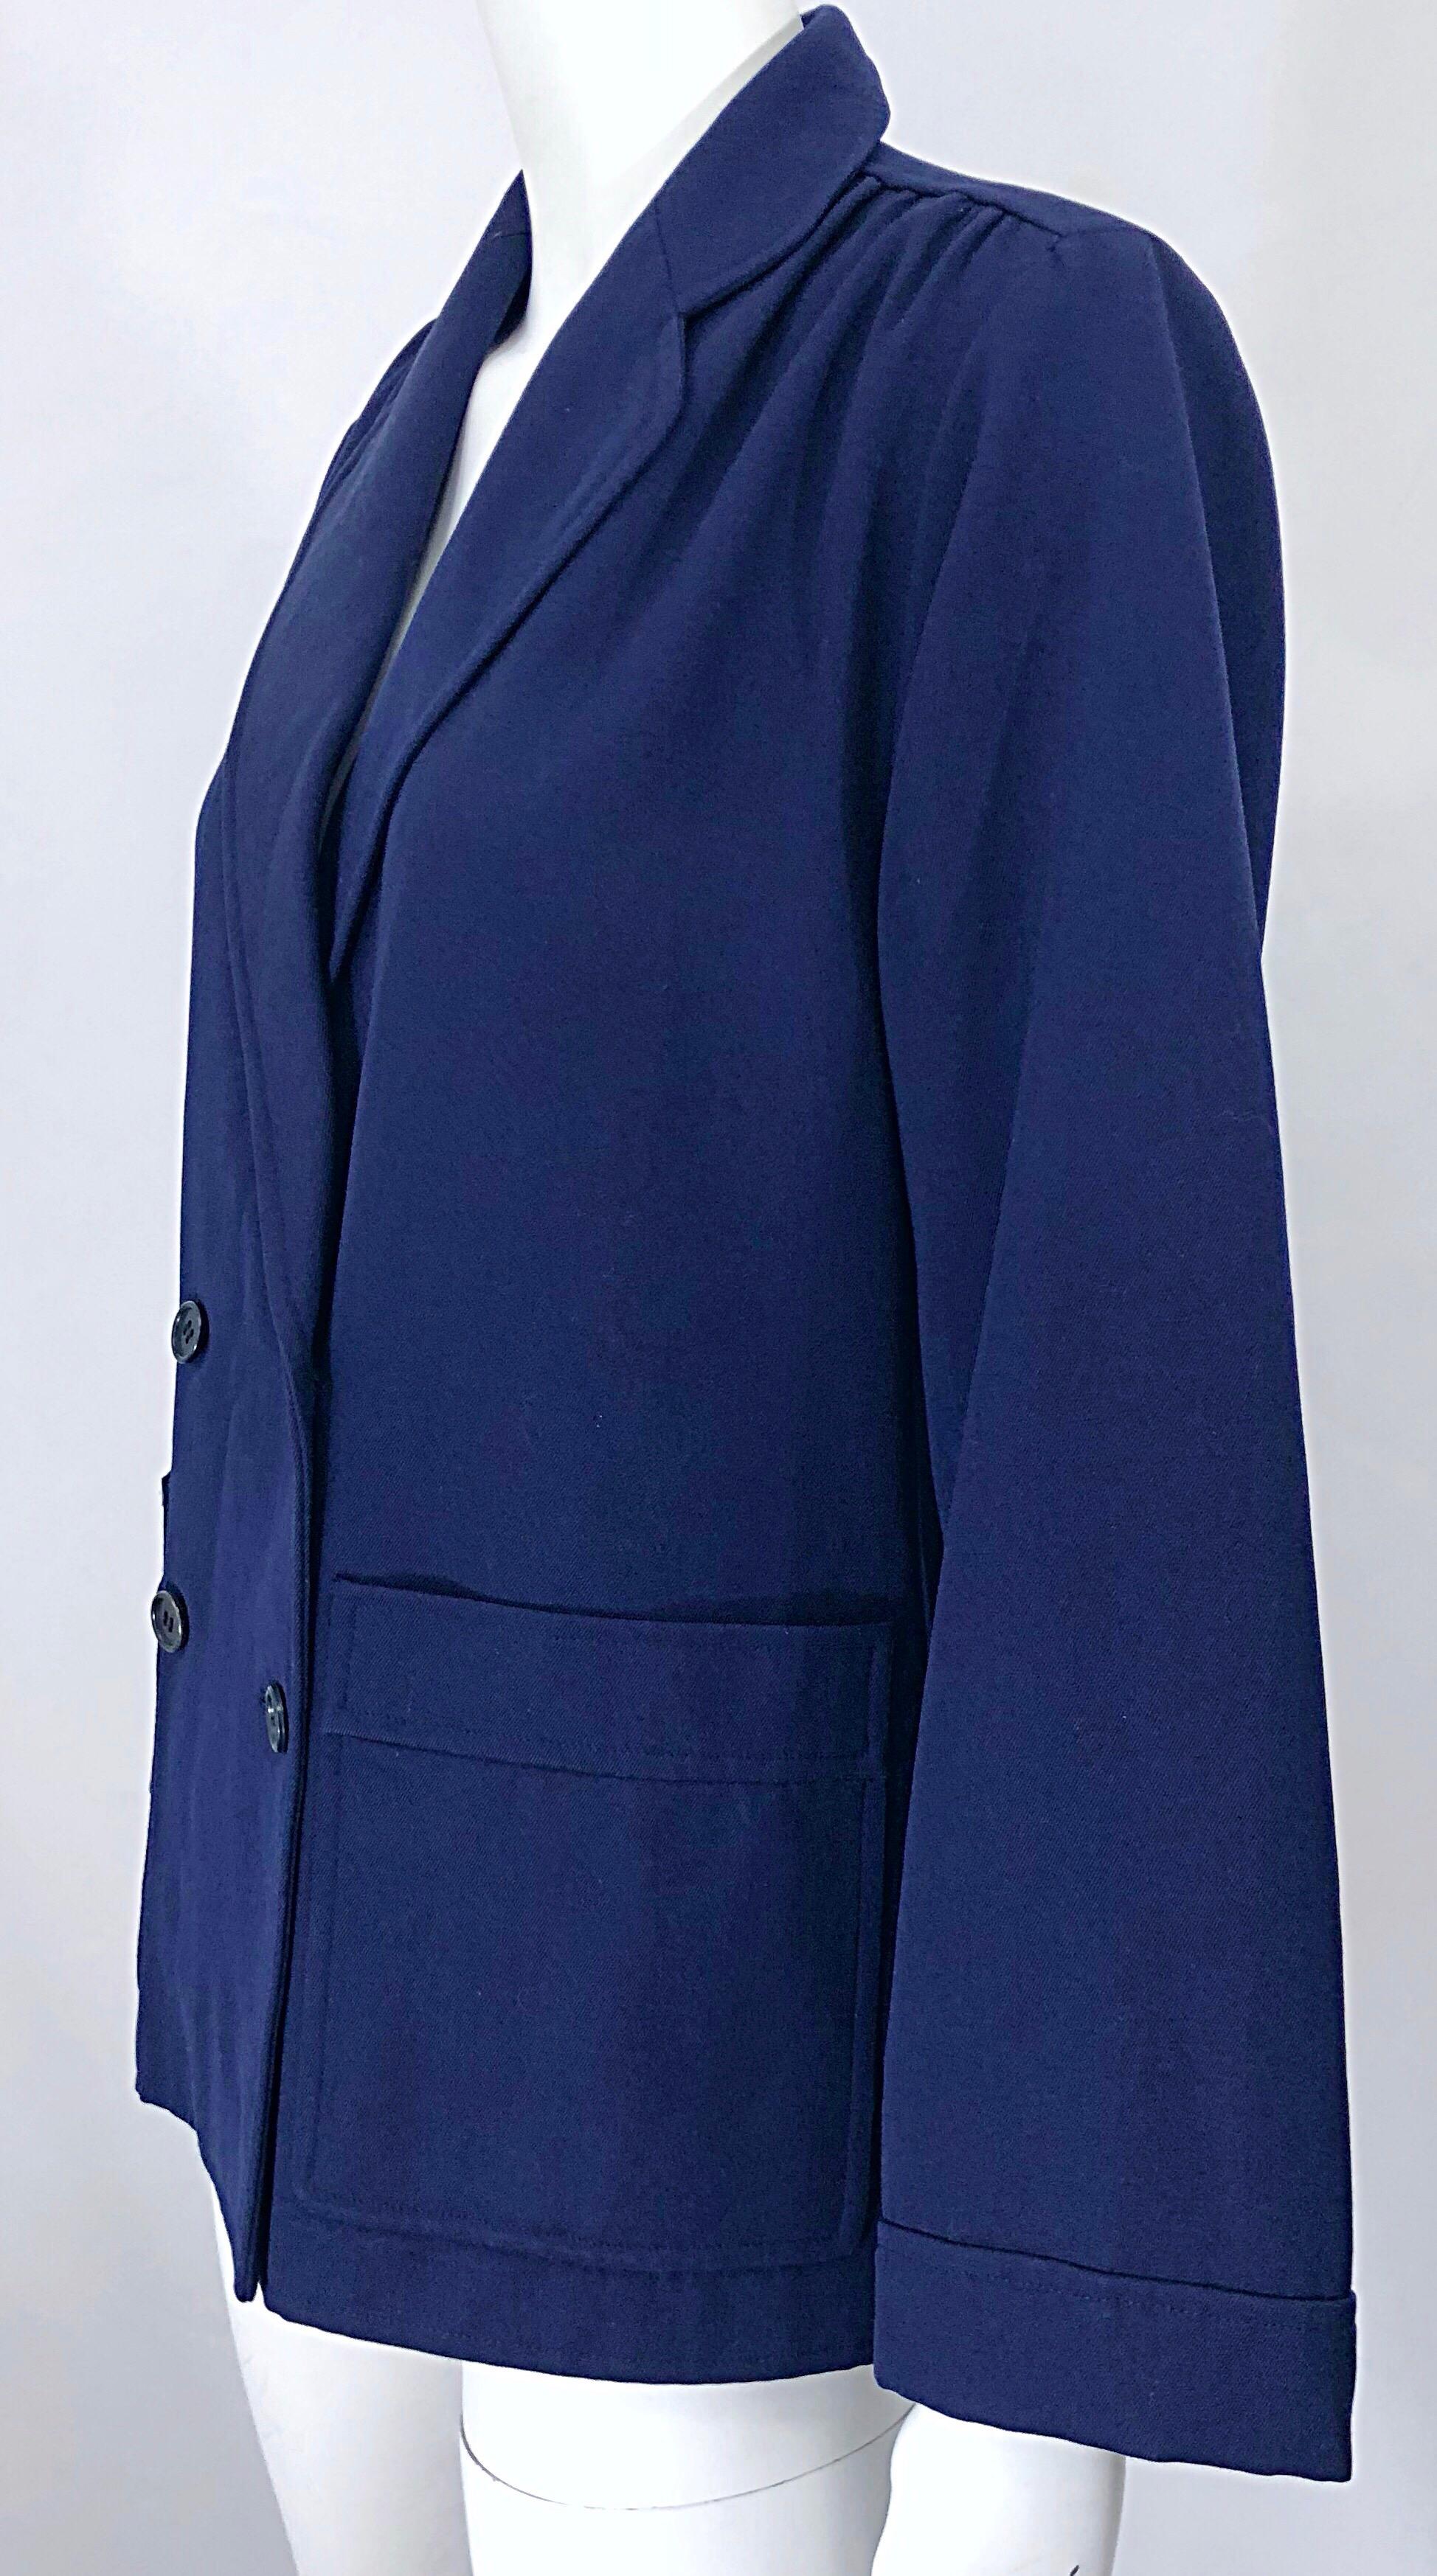 Chic 1960s Yves Saint Laurent Navy Blue Lightweight Wool Vintage Swing Jacket For Sale 4